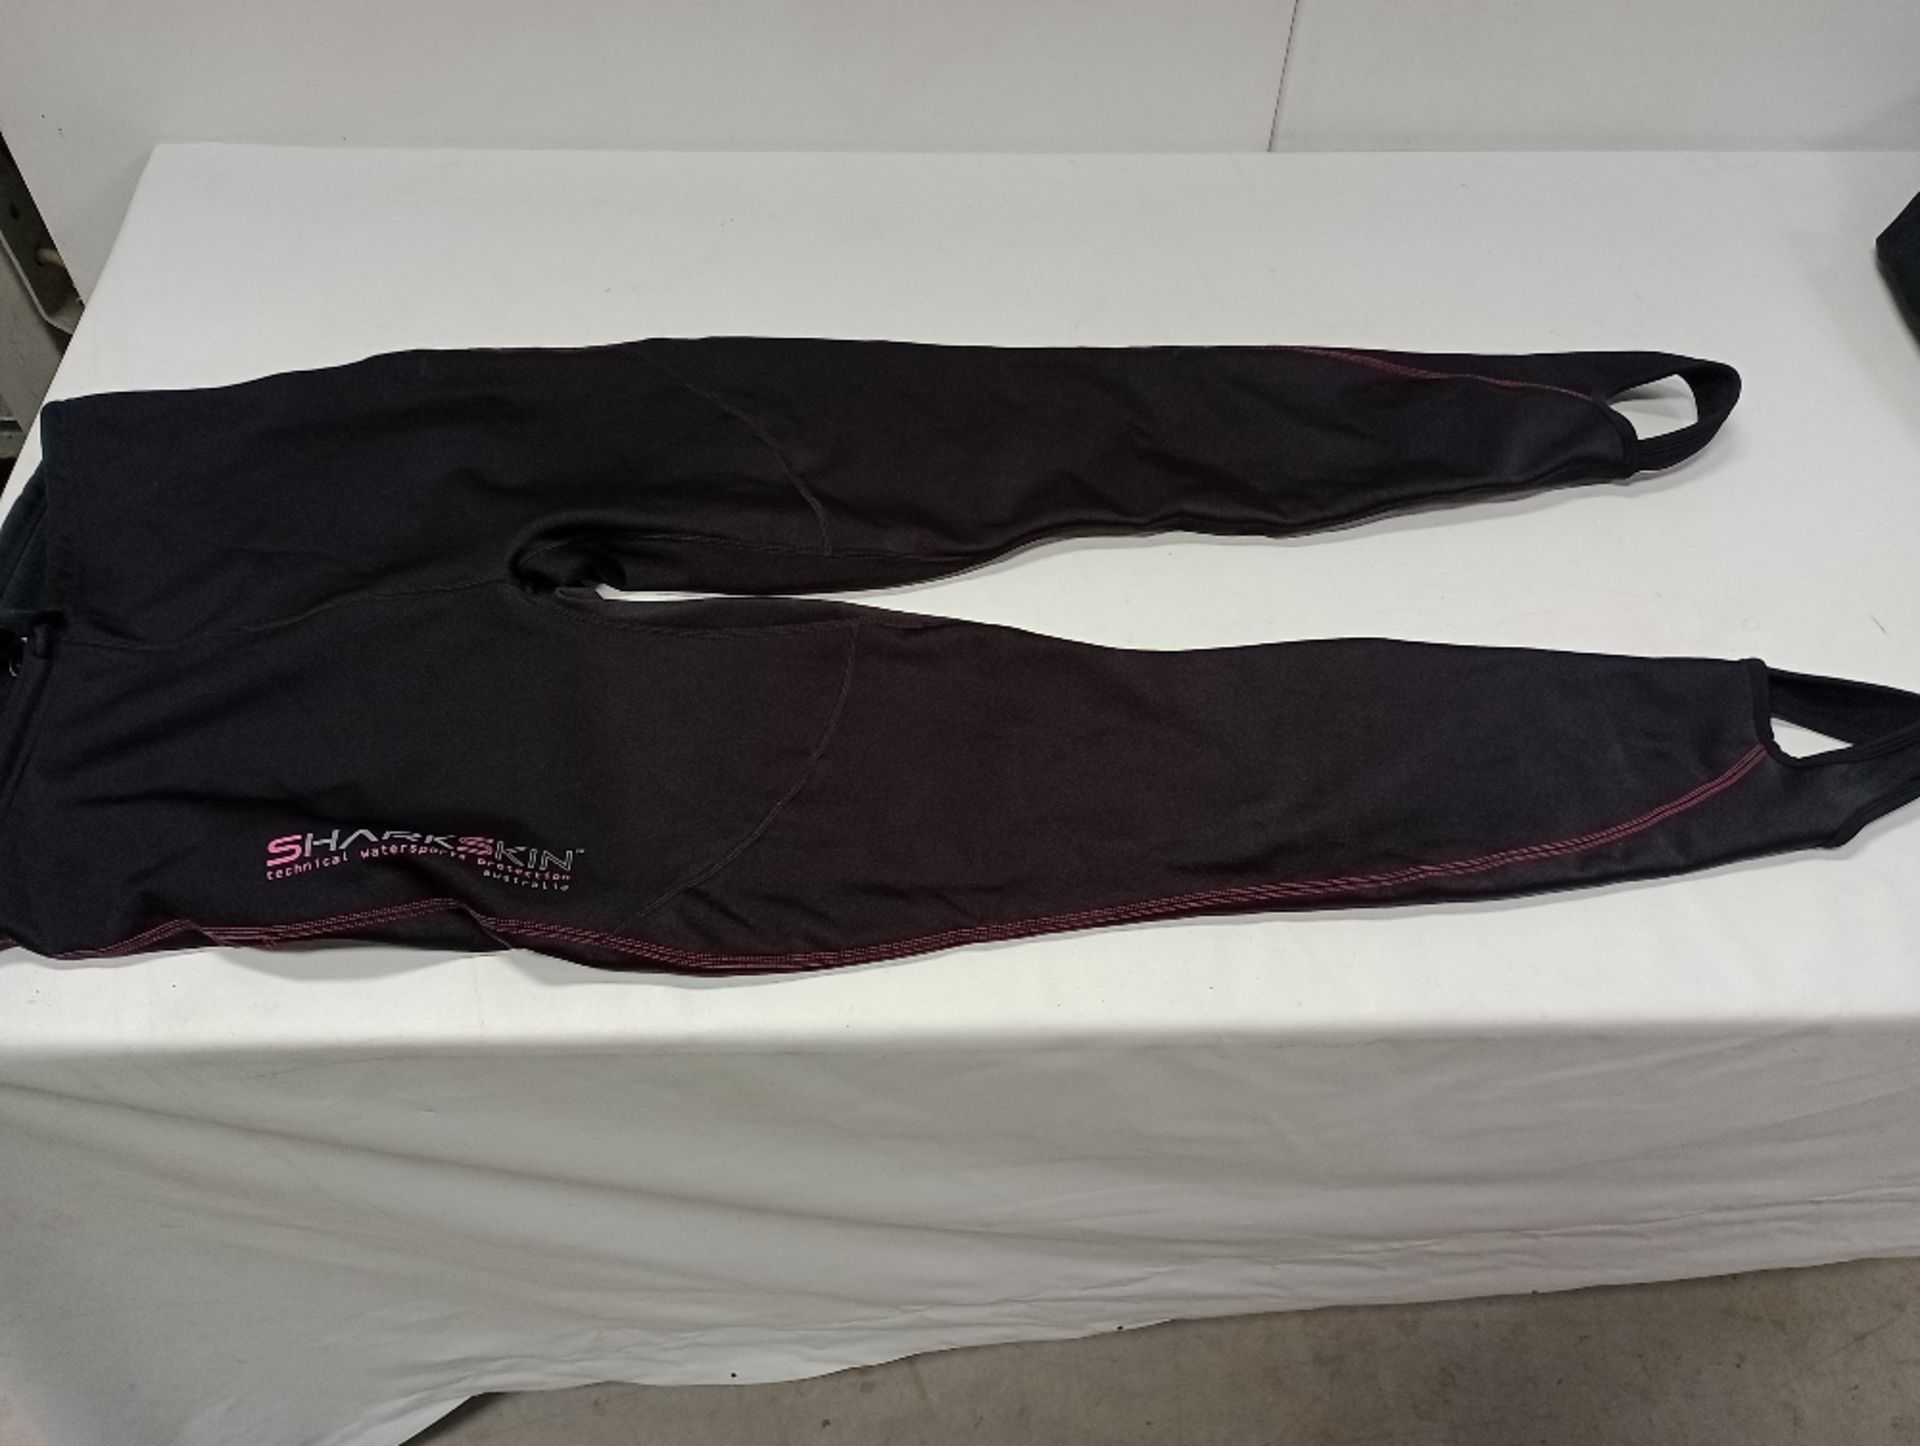 Various Sharkskin Technical Watersports Protection Chillproof Apparel (Location: Brentwood. Please - Image 3 of 3